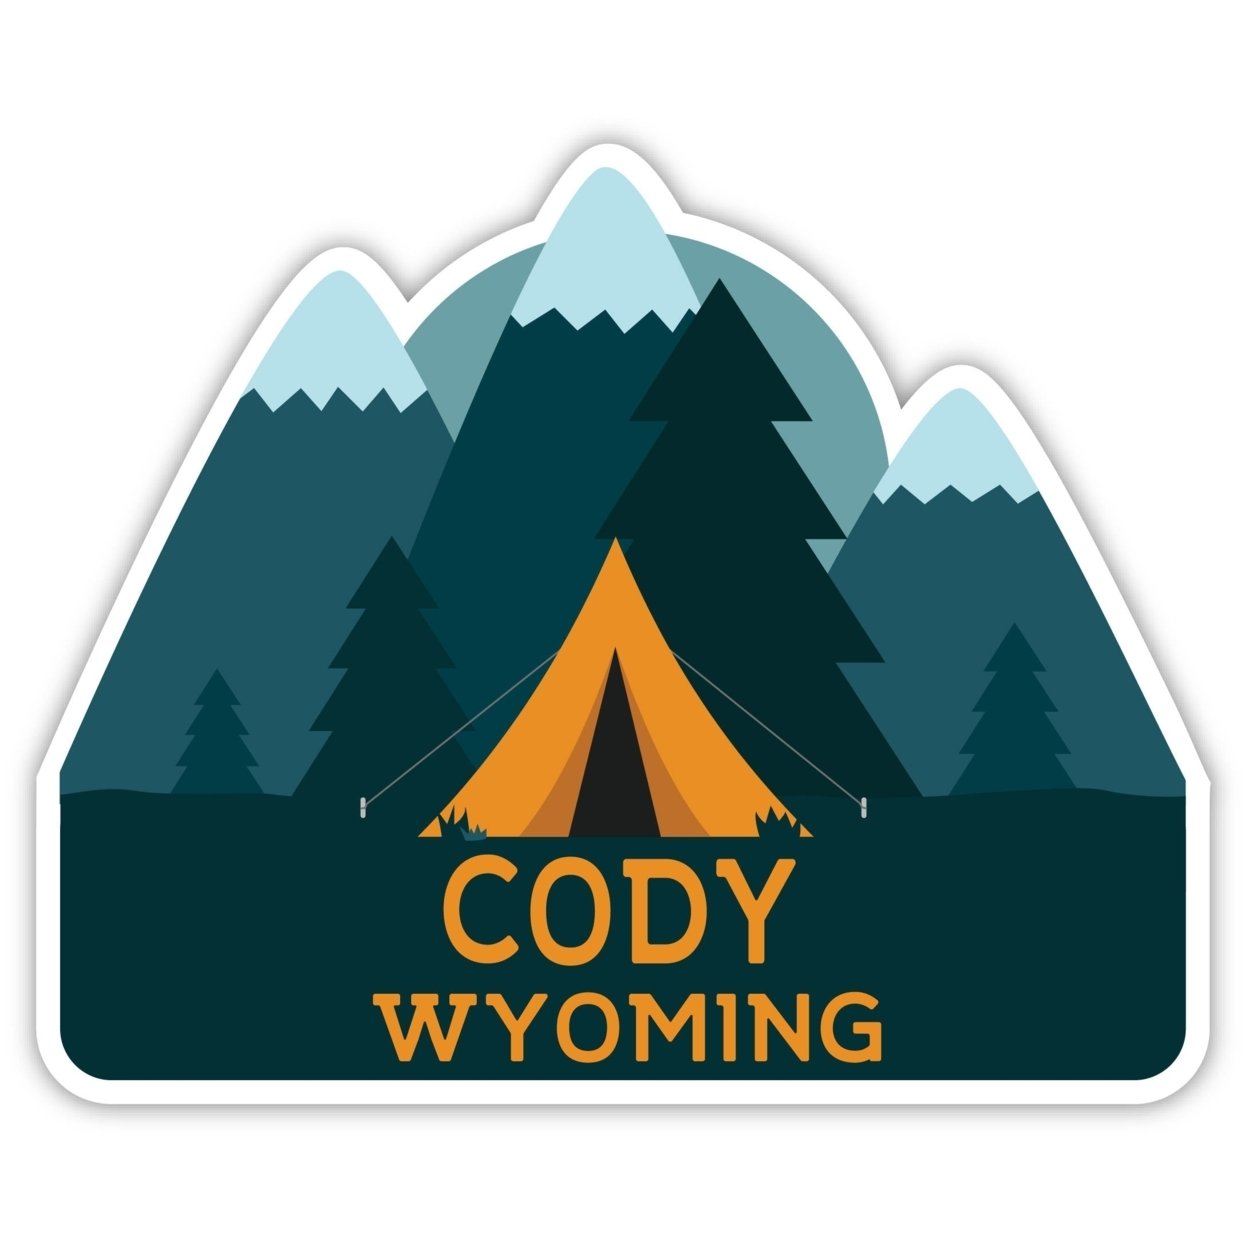 Cody Wyoming Souvenir Decorative Stickers (Choose Theme And Size) - Single Unit, 8-Inch, Tent